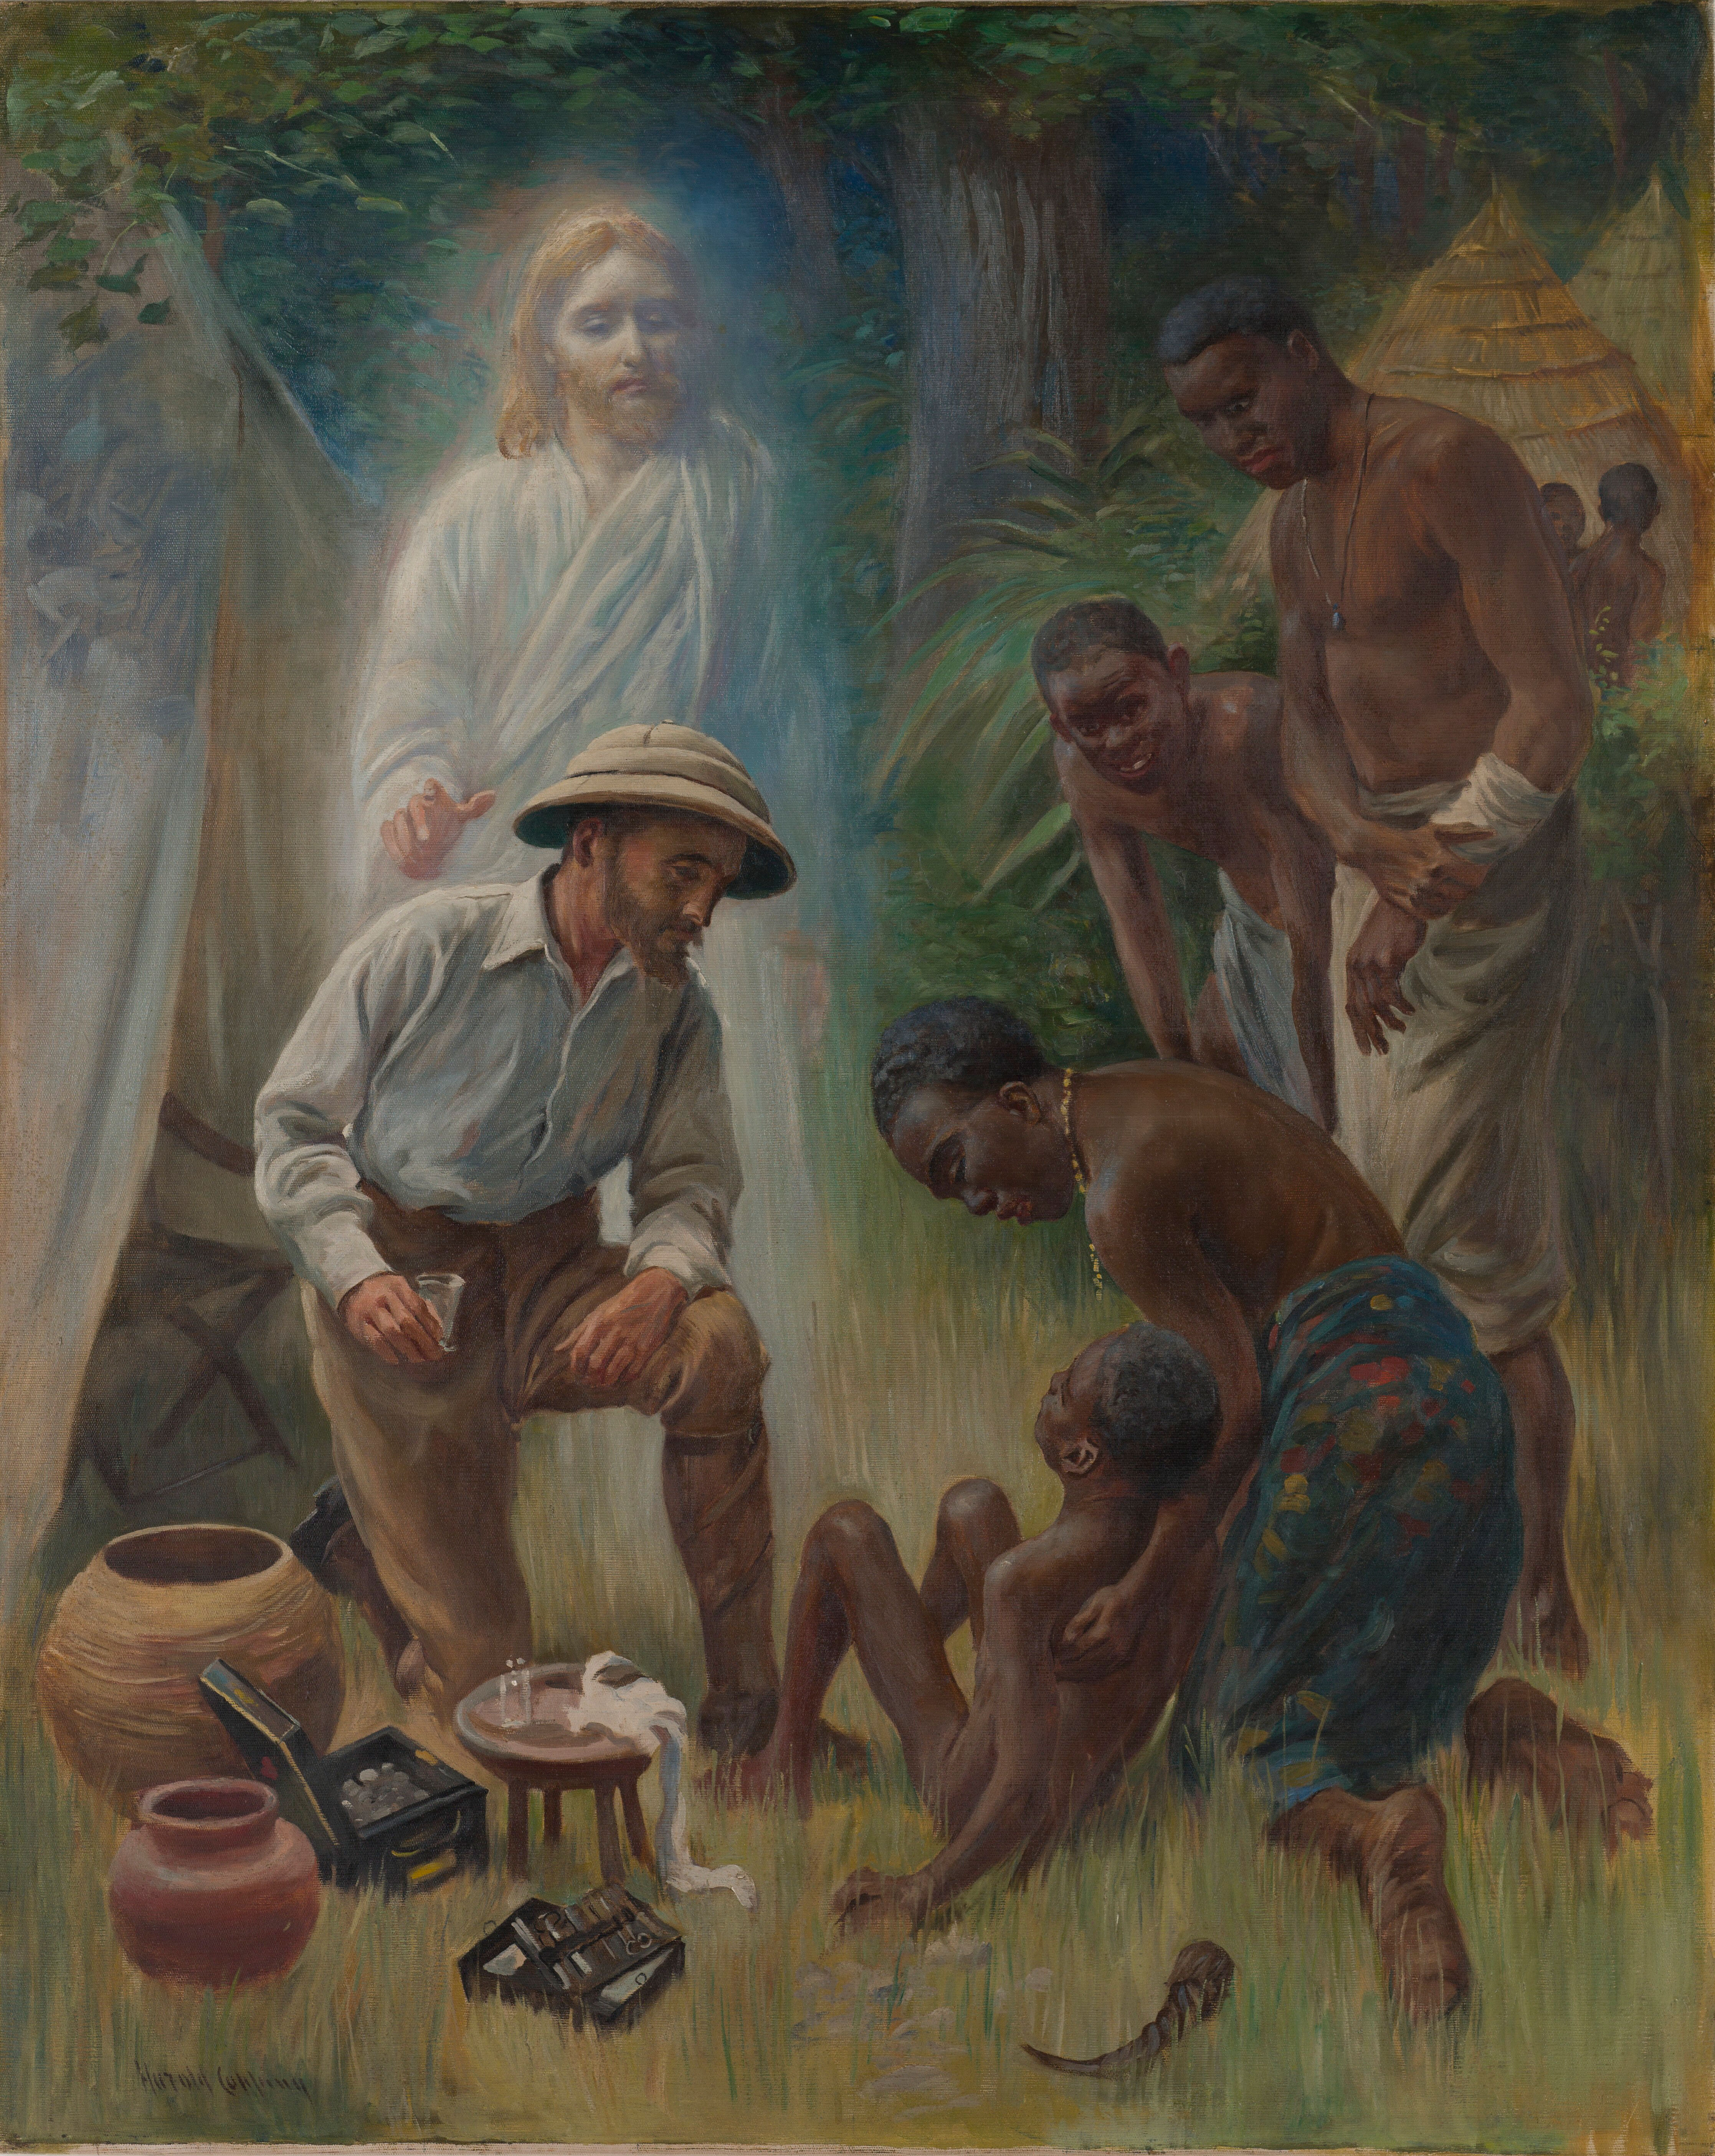 Painting of a light-skinned European missionary in a pith helmet attending to an apparently sick dark-skinned child. Jesus stands glowing as a ghost behind the missionary with his hand on the missionary's shoulder